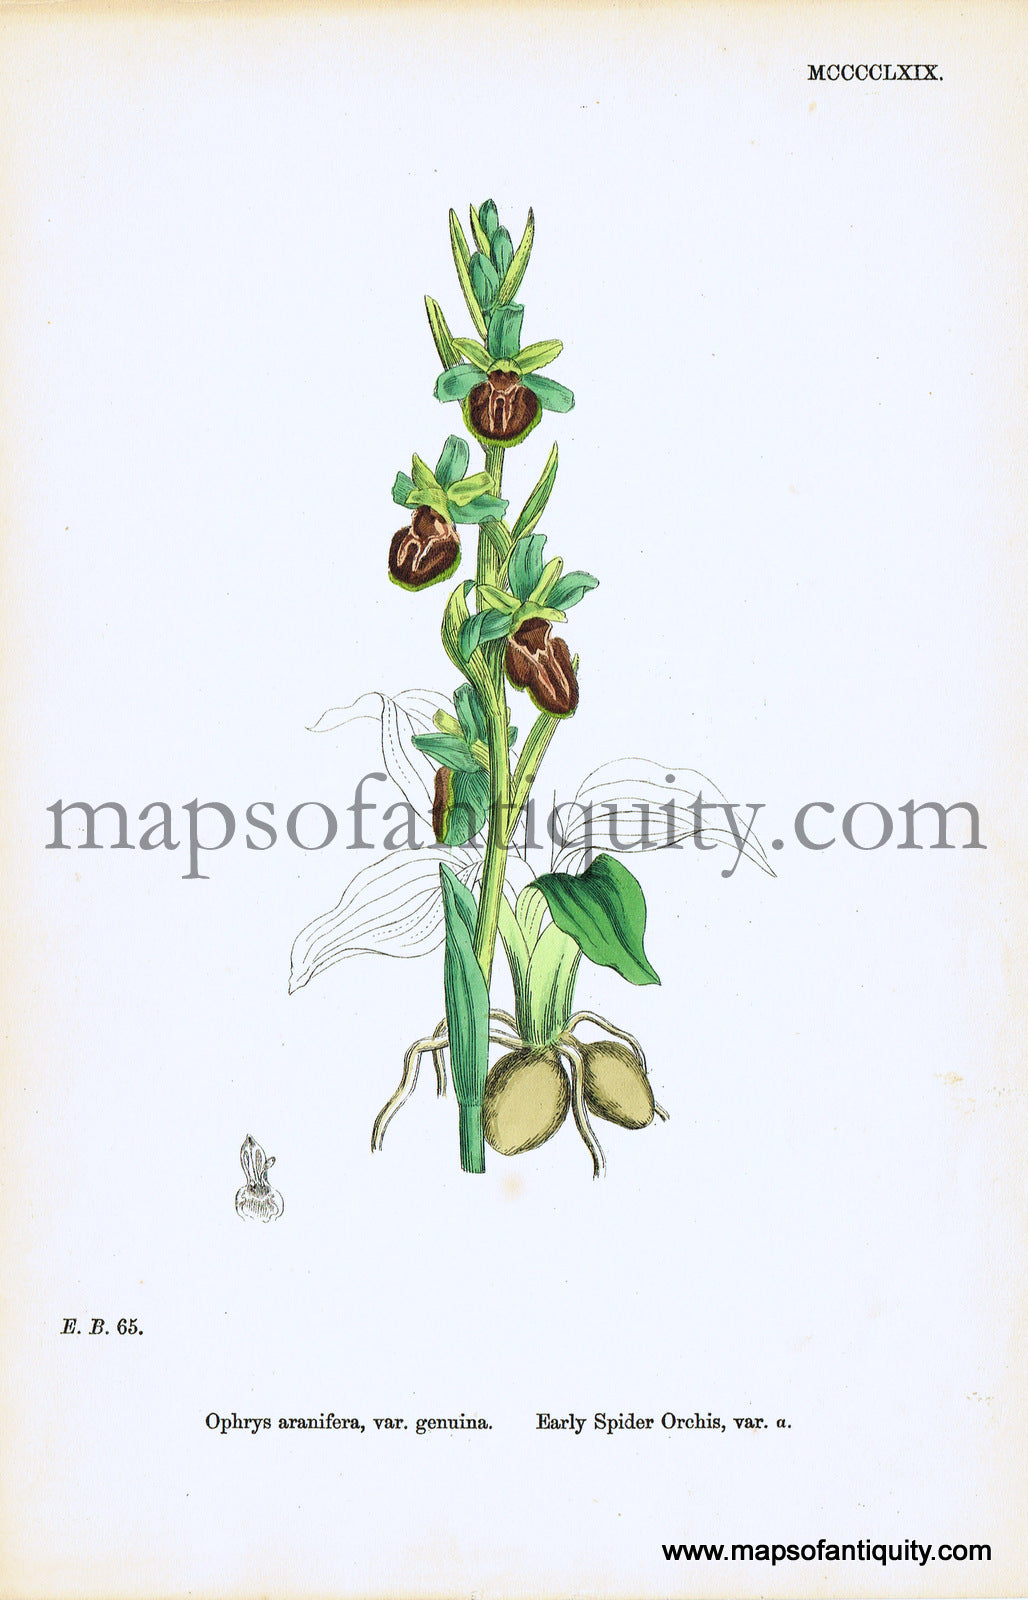 Antique-Hand-Colored-Print-Ophrys-aranifera-var.-genuina-Antique-Prints-Natural-History-Botanical-c.-1860-Sowerby-Maps-Of-Antiquity